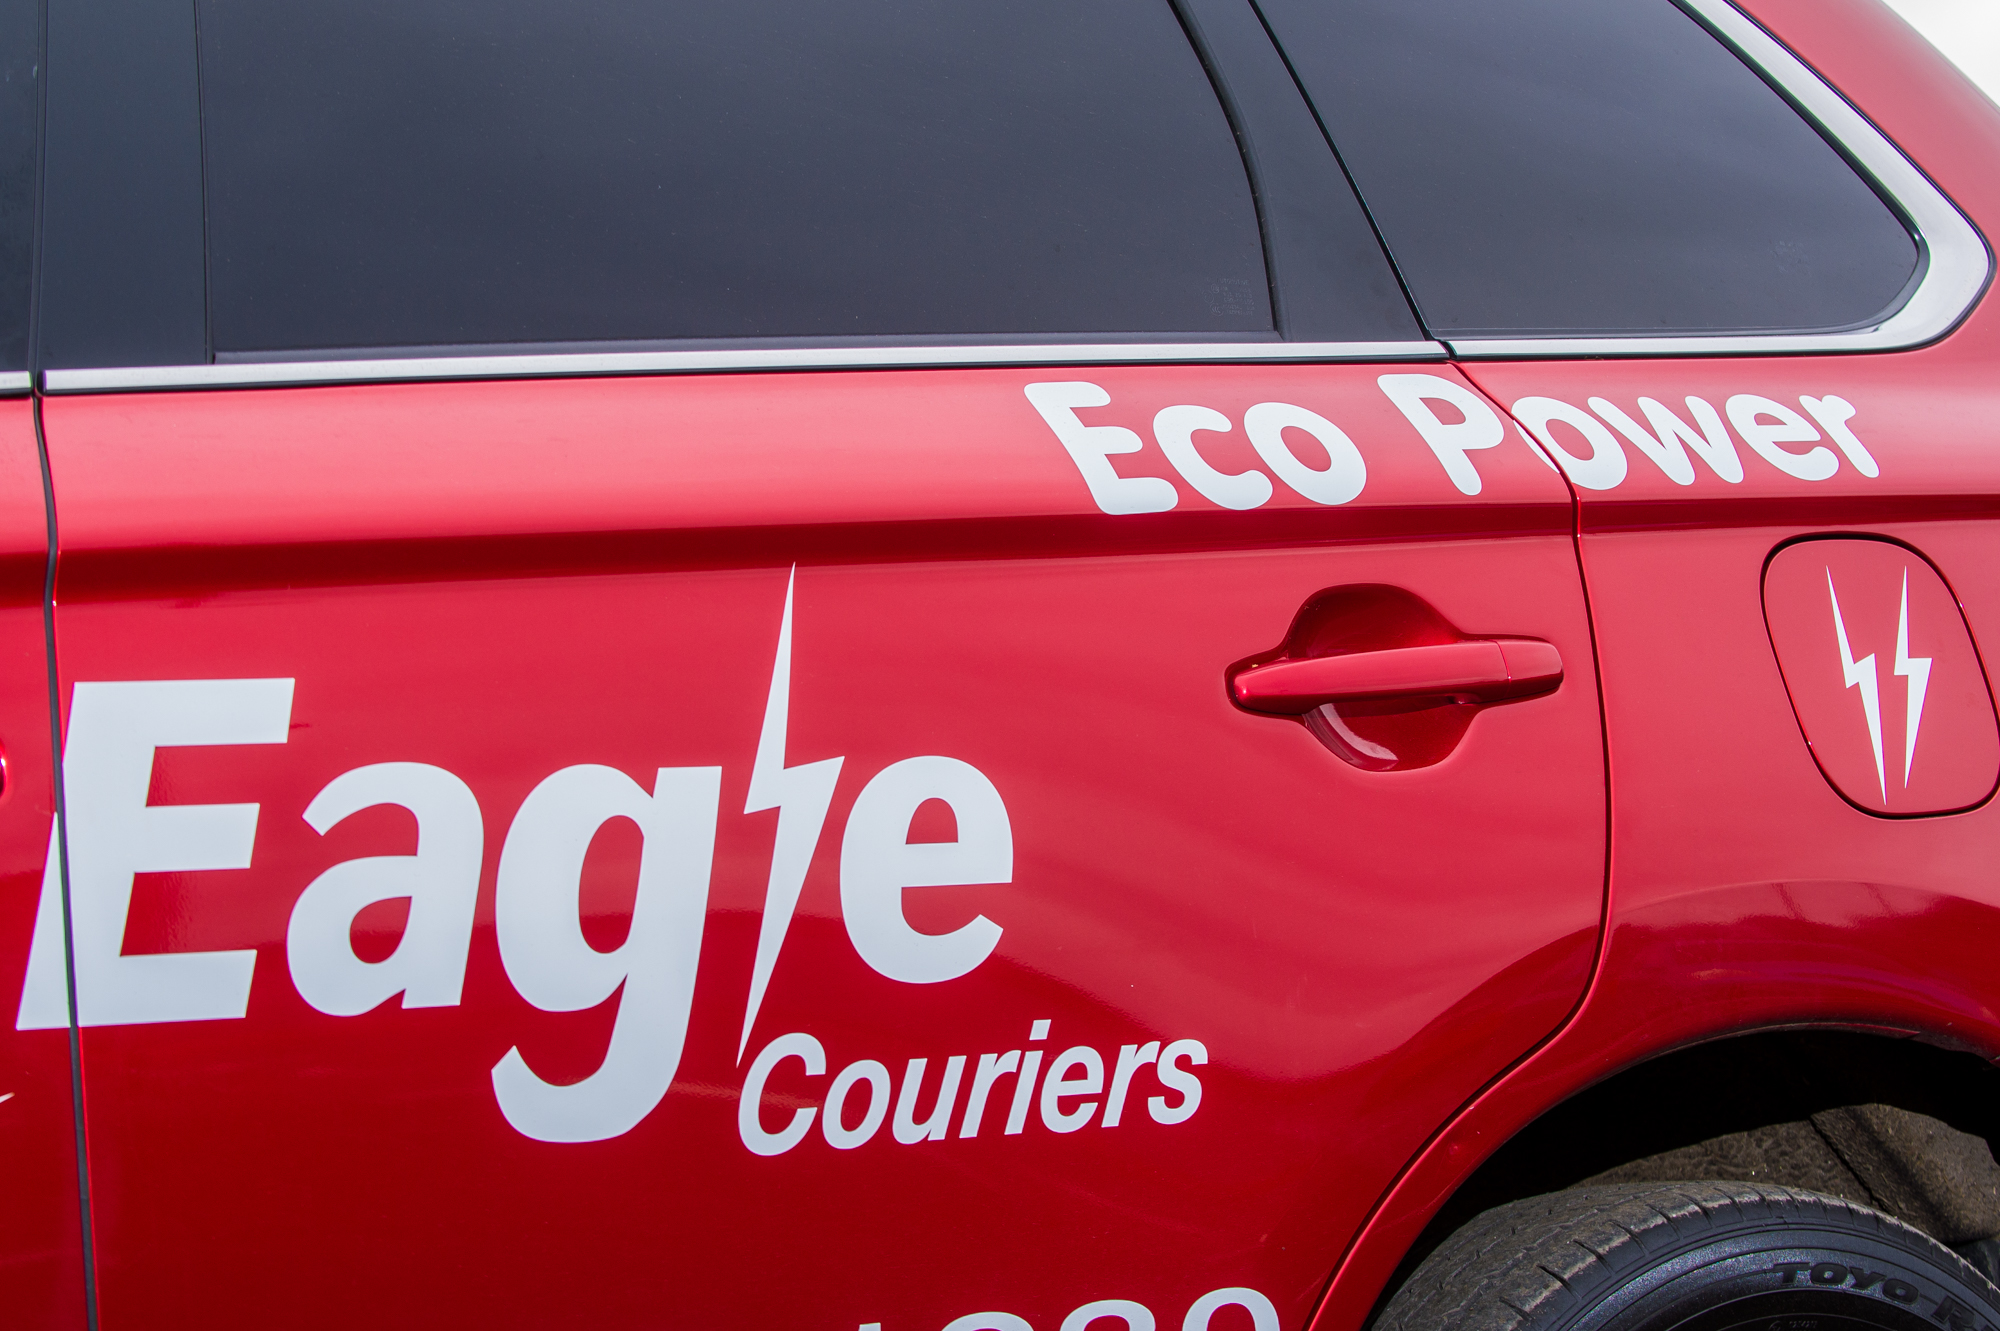 Mitsubishi Hybid EV operated by Eagle Couriers in Scotland